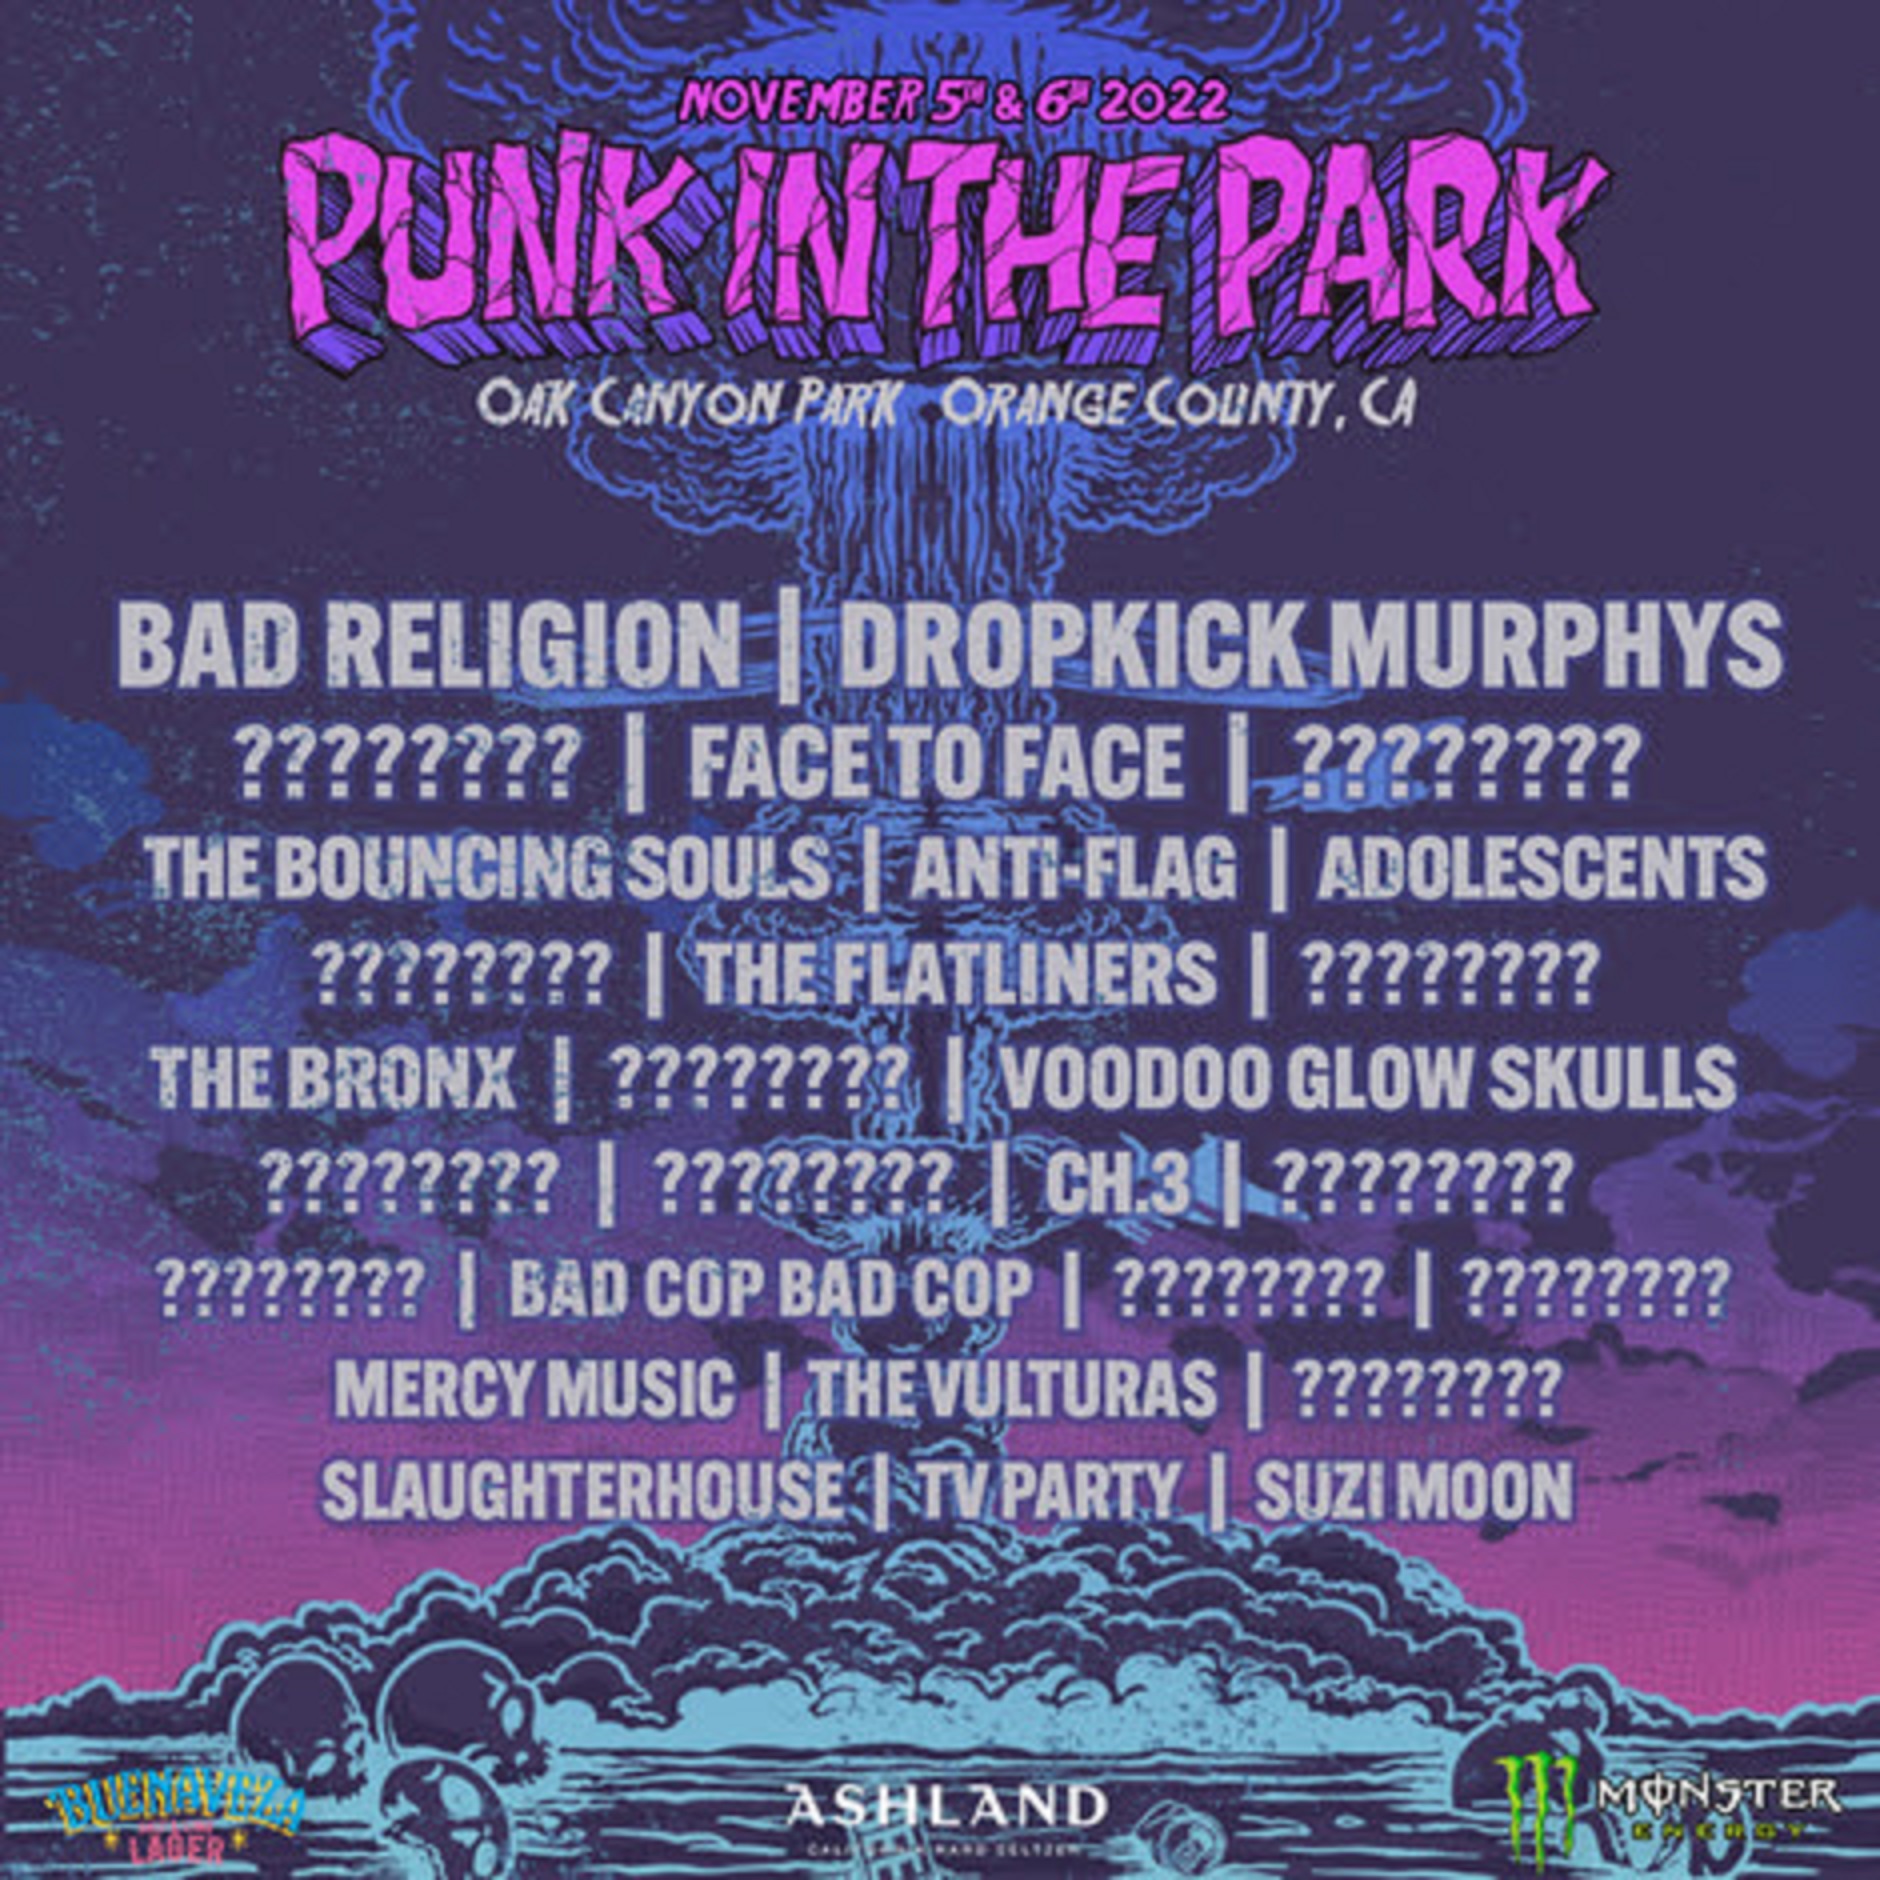 Punk In The Park: Bad Religion, Dropkick Murphys,  & More With Craft Beer Tasting Nov. 5 & 6 In Orange County, CA